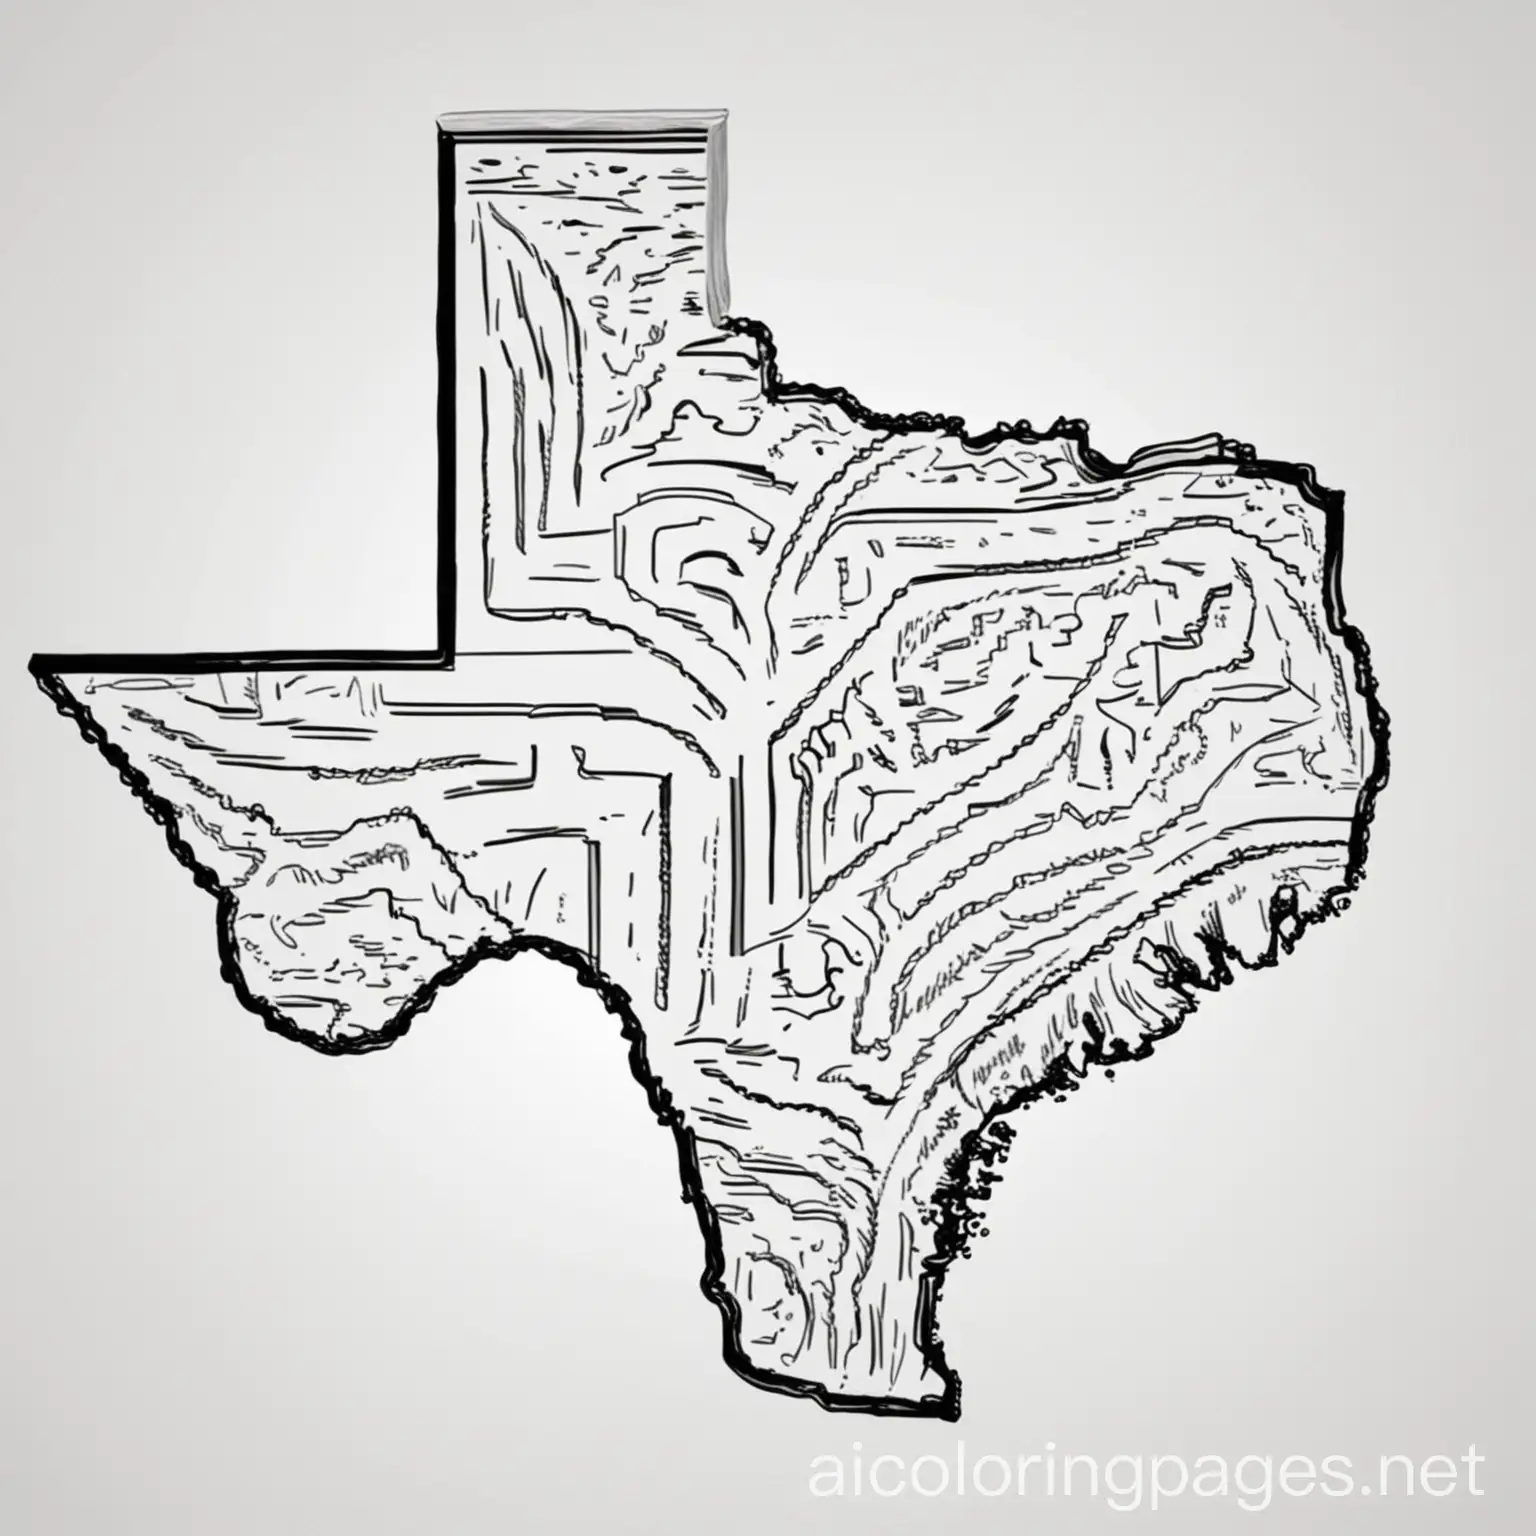 texas, Coloring Page, black and white, line art, white background, Simplicity, Ample White Space. The background of the coloring page is plain white to make it easy for young children to color within the lines. The outlines of all the subjects are easy to distinguish, making it simple for kids to color without too much difficulty